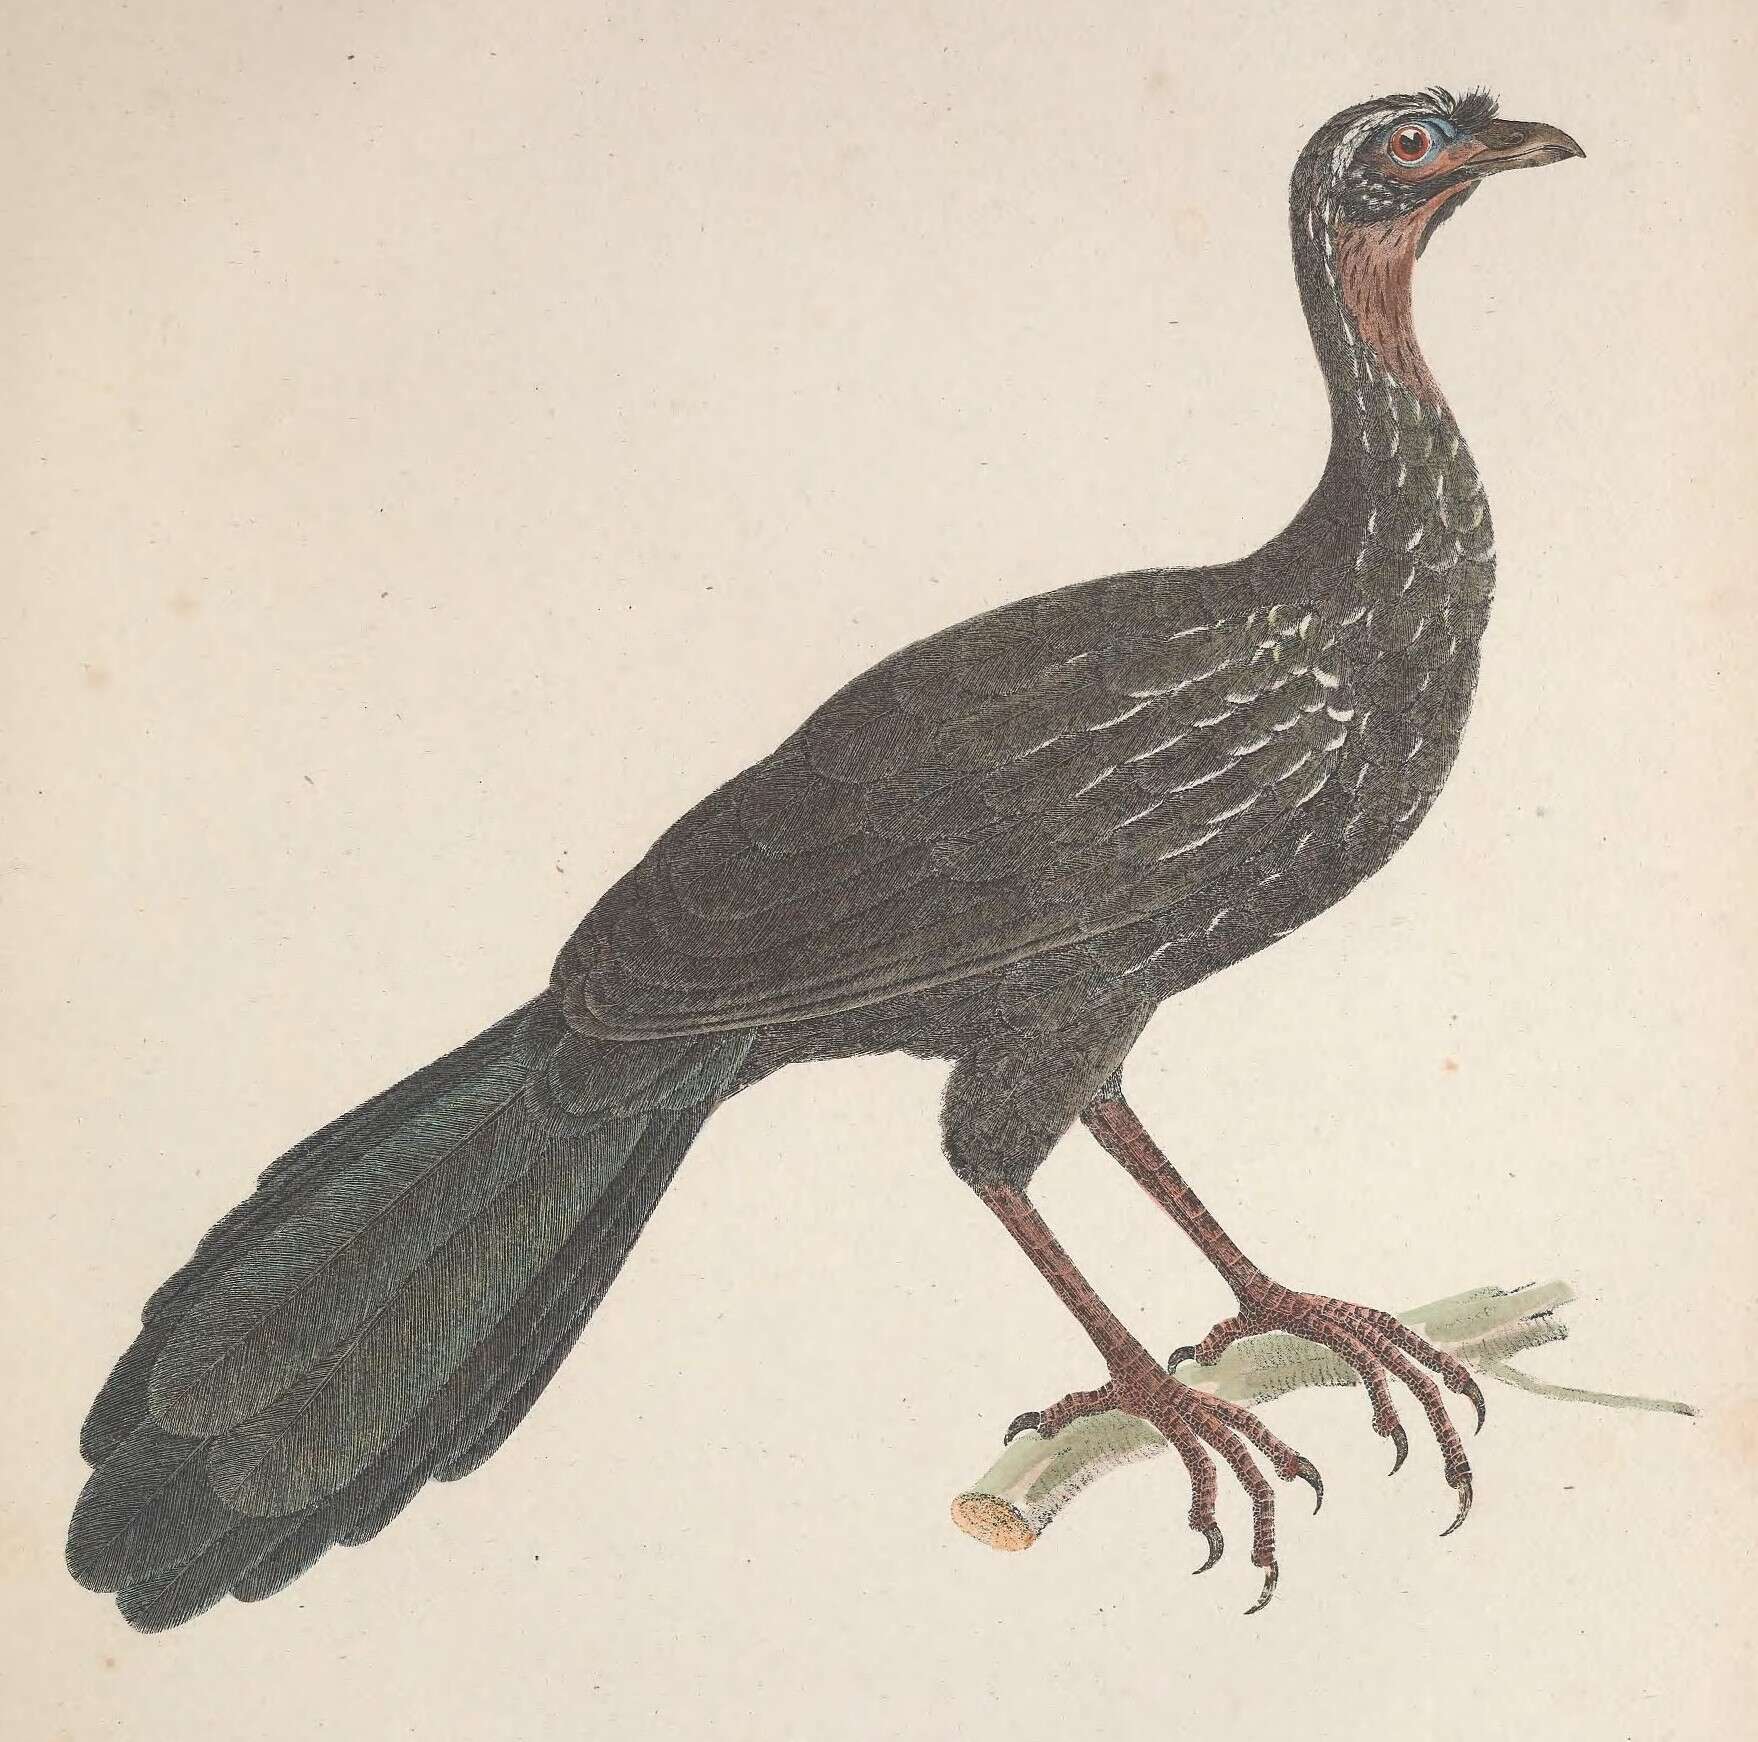 Image of White-browed Guan